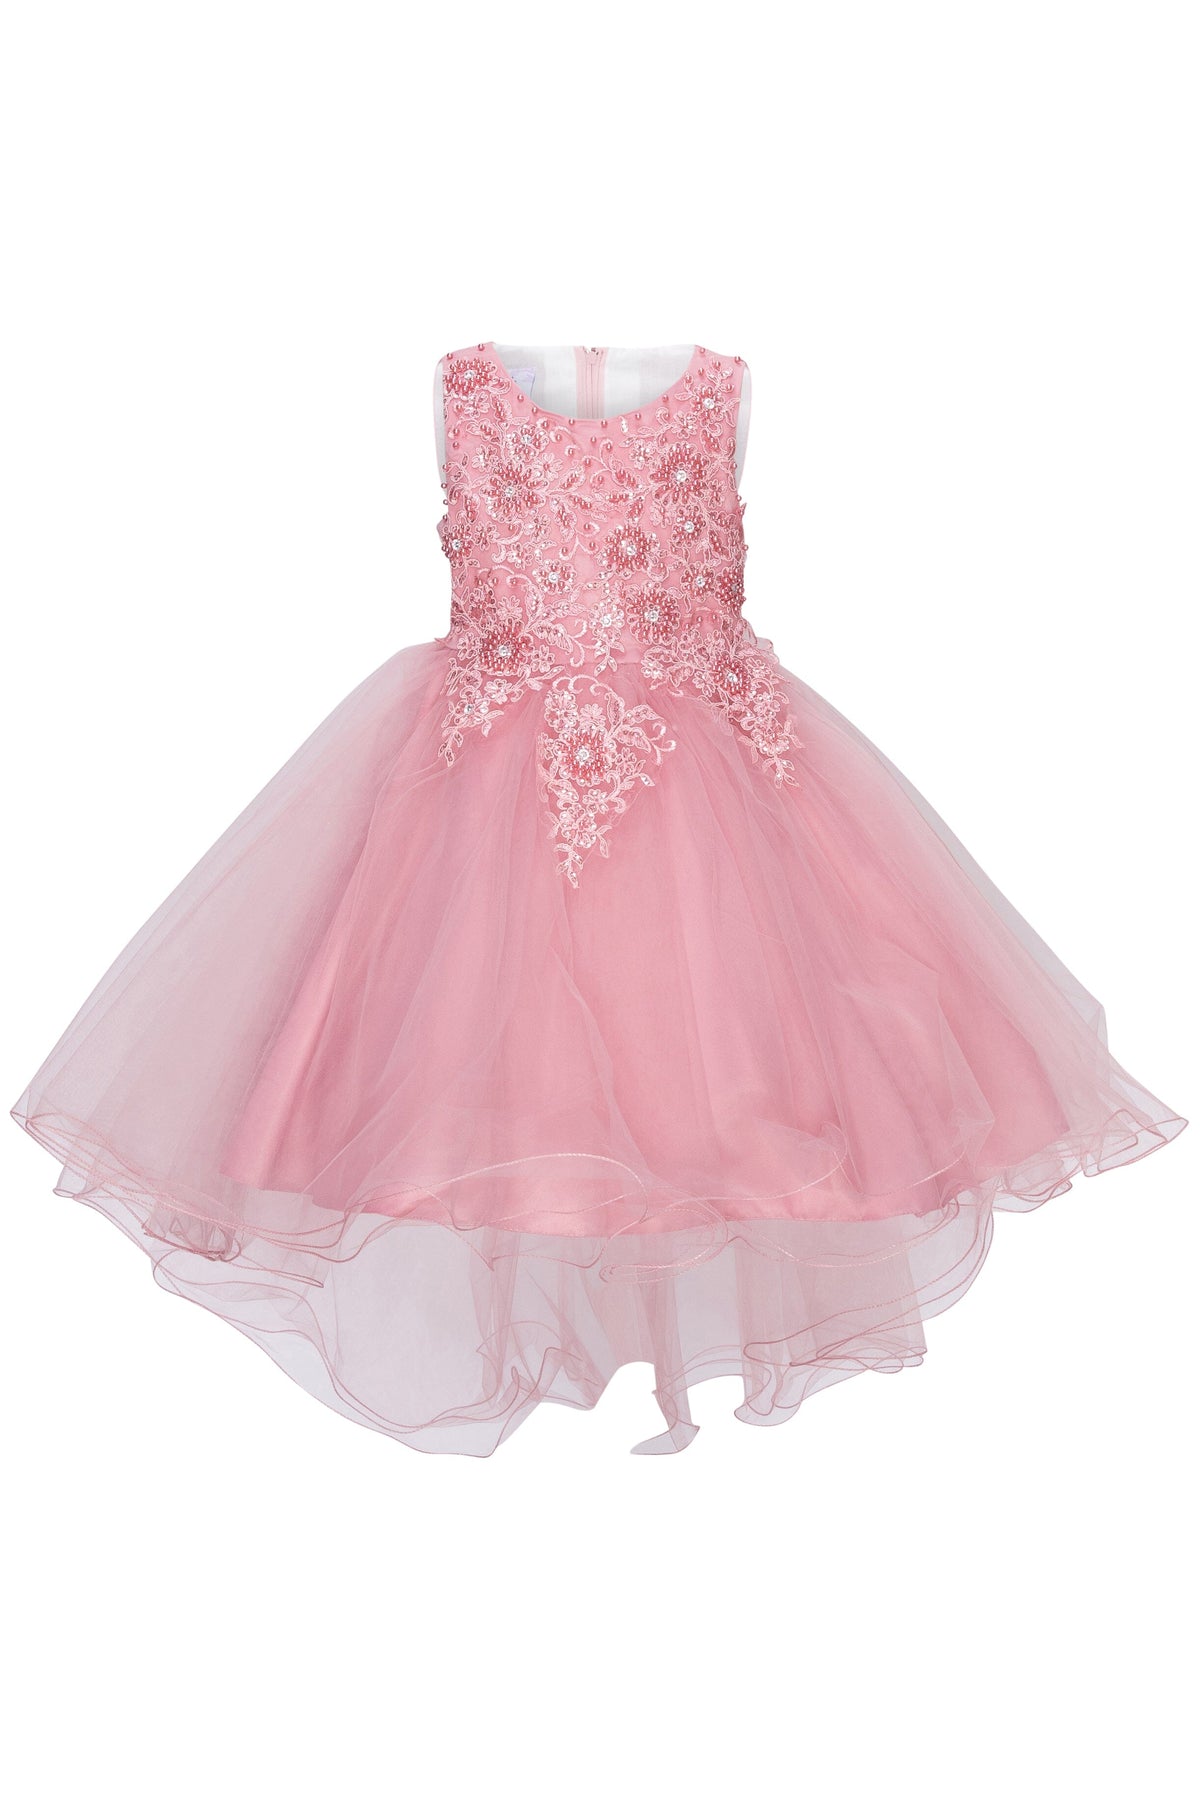 Girls Beaded High Low Tulle Dress by Cinderella Couture 9086 – ABC Fashion